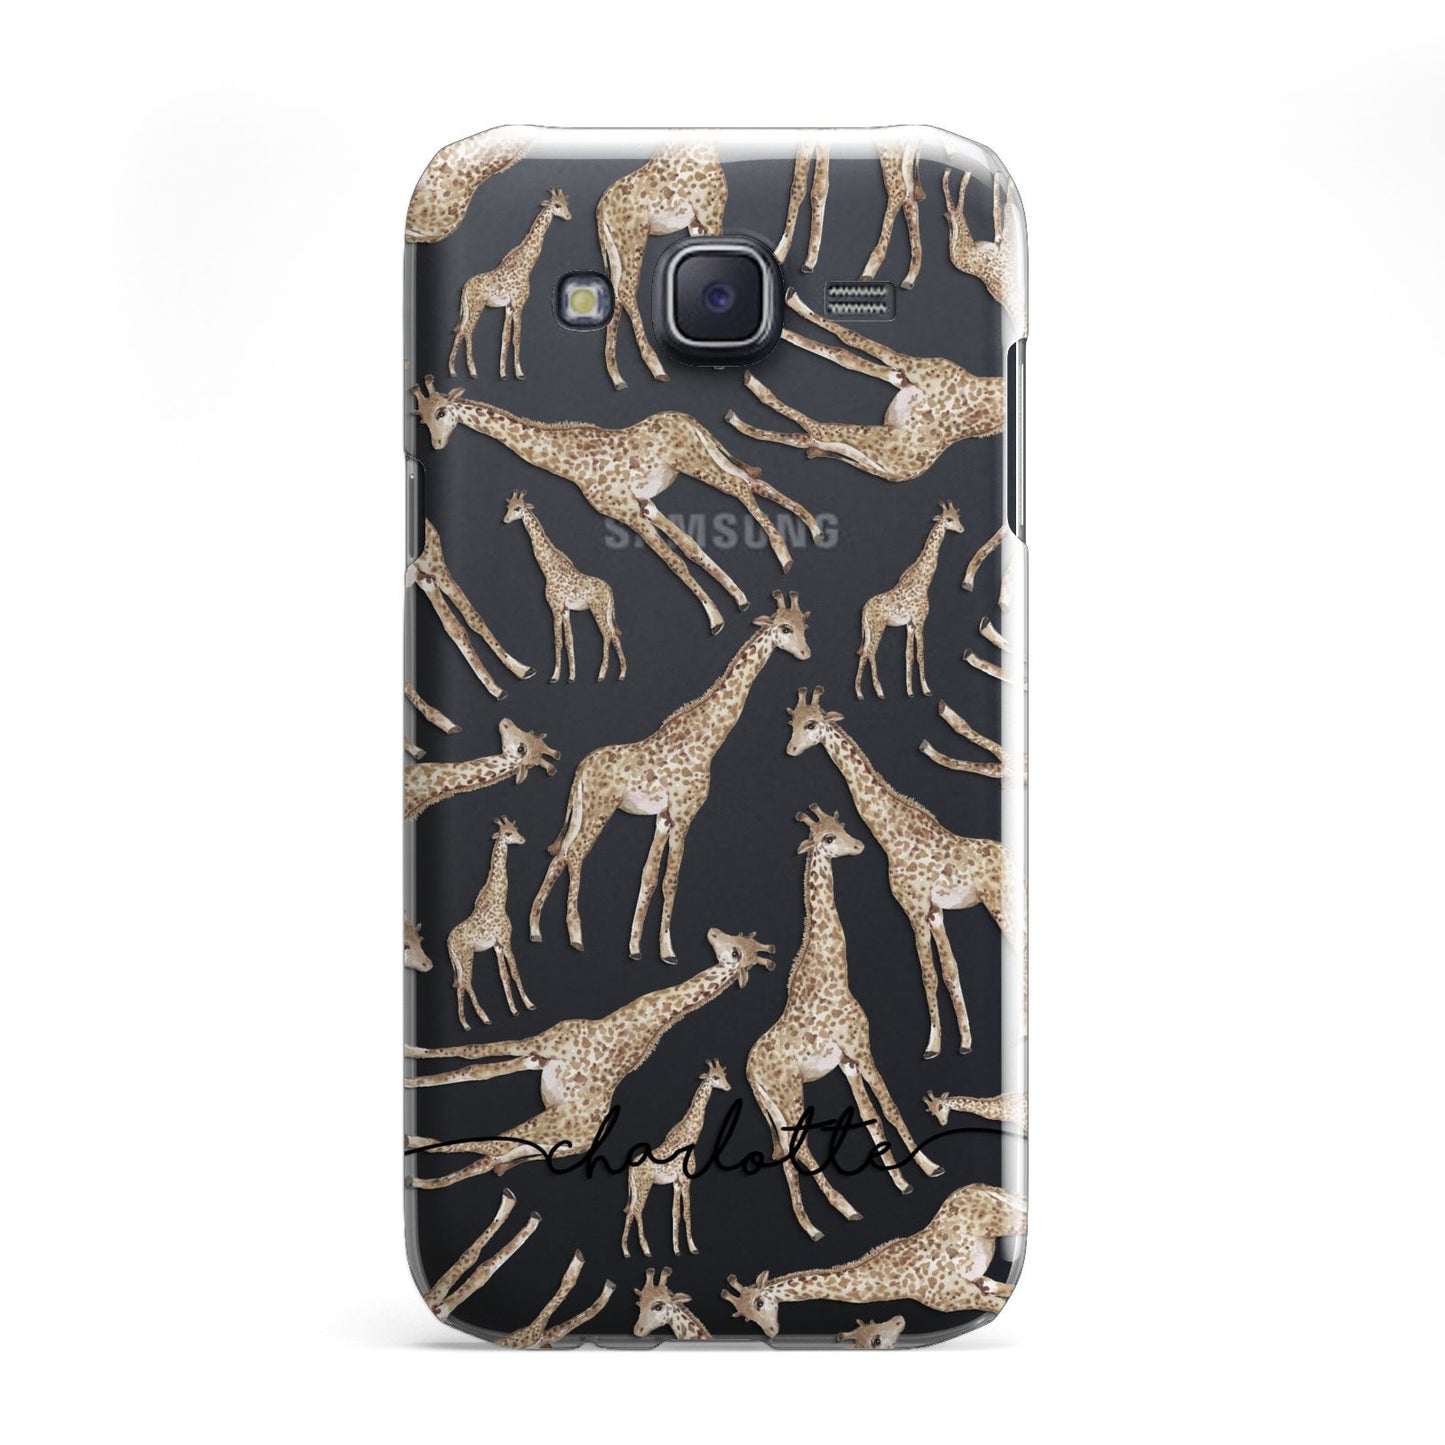 Personalised Giraffes with Name Samsung Galaxy J5 Case